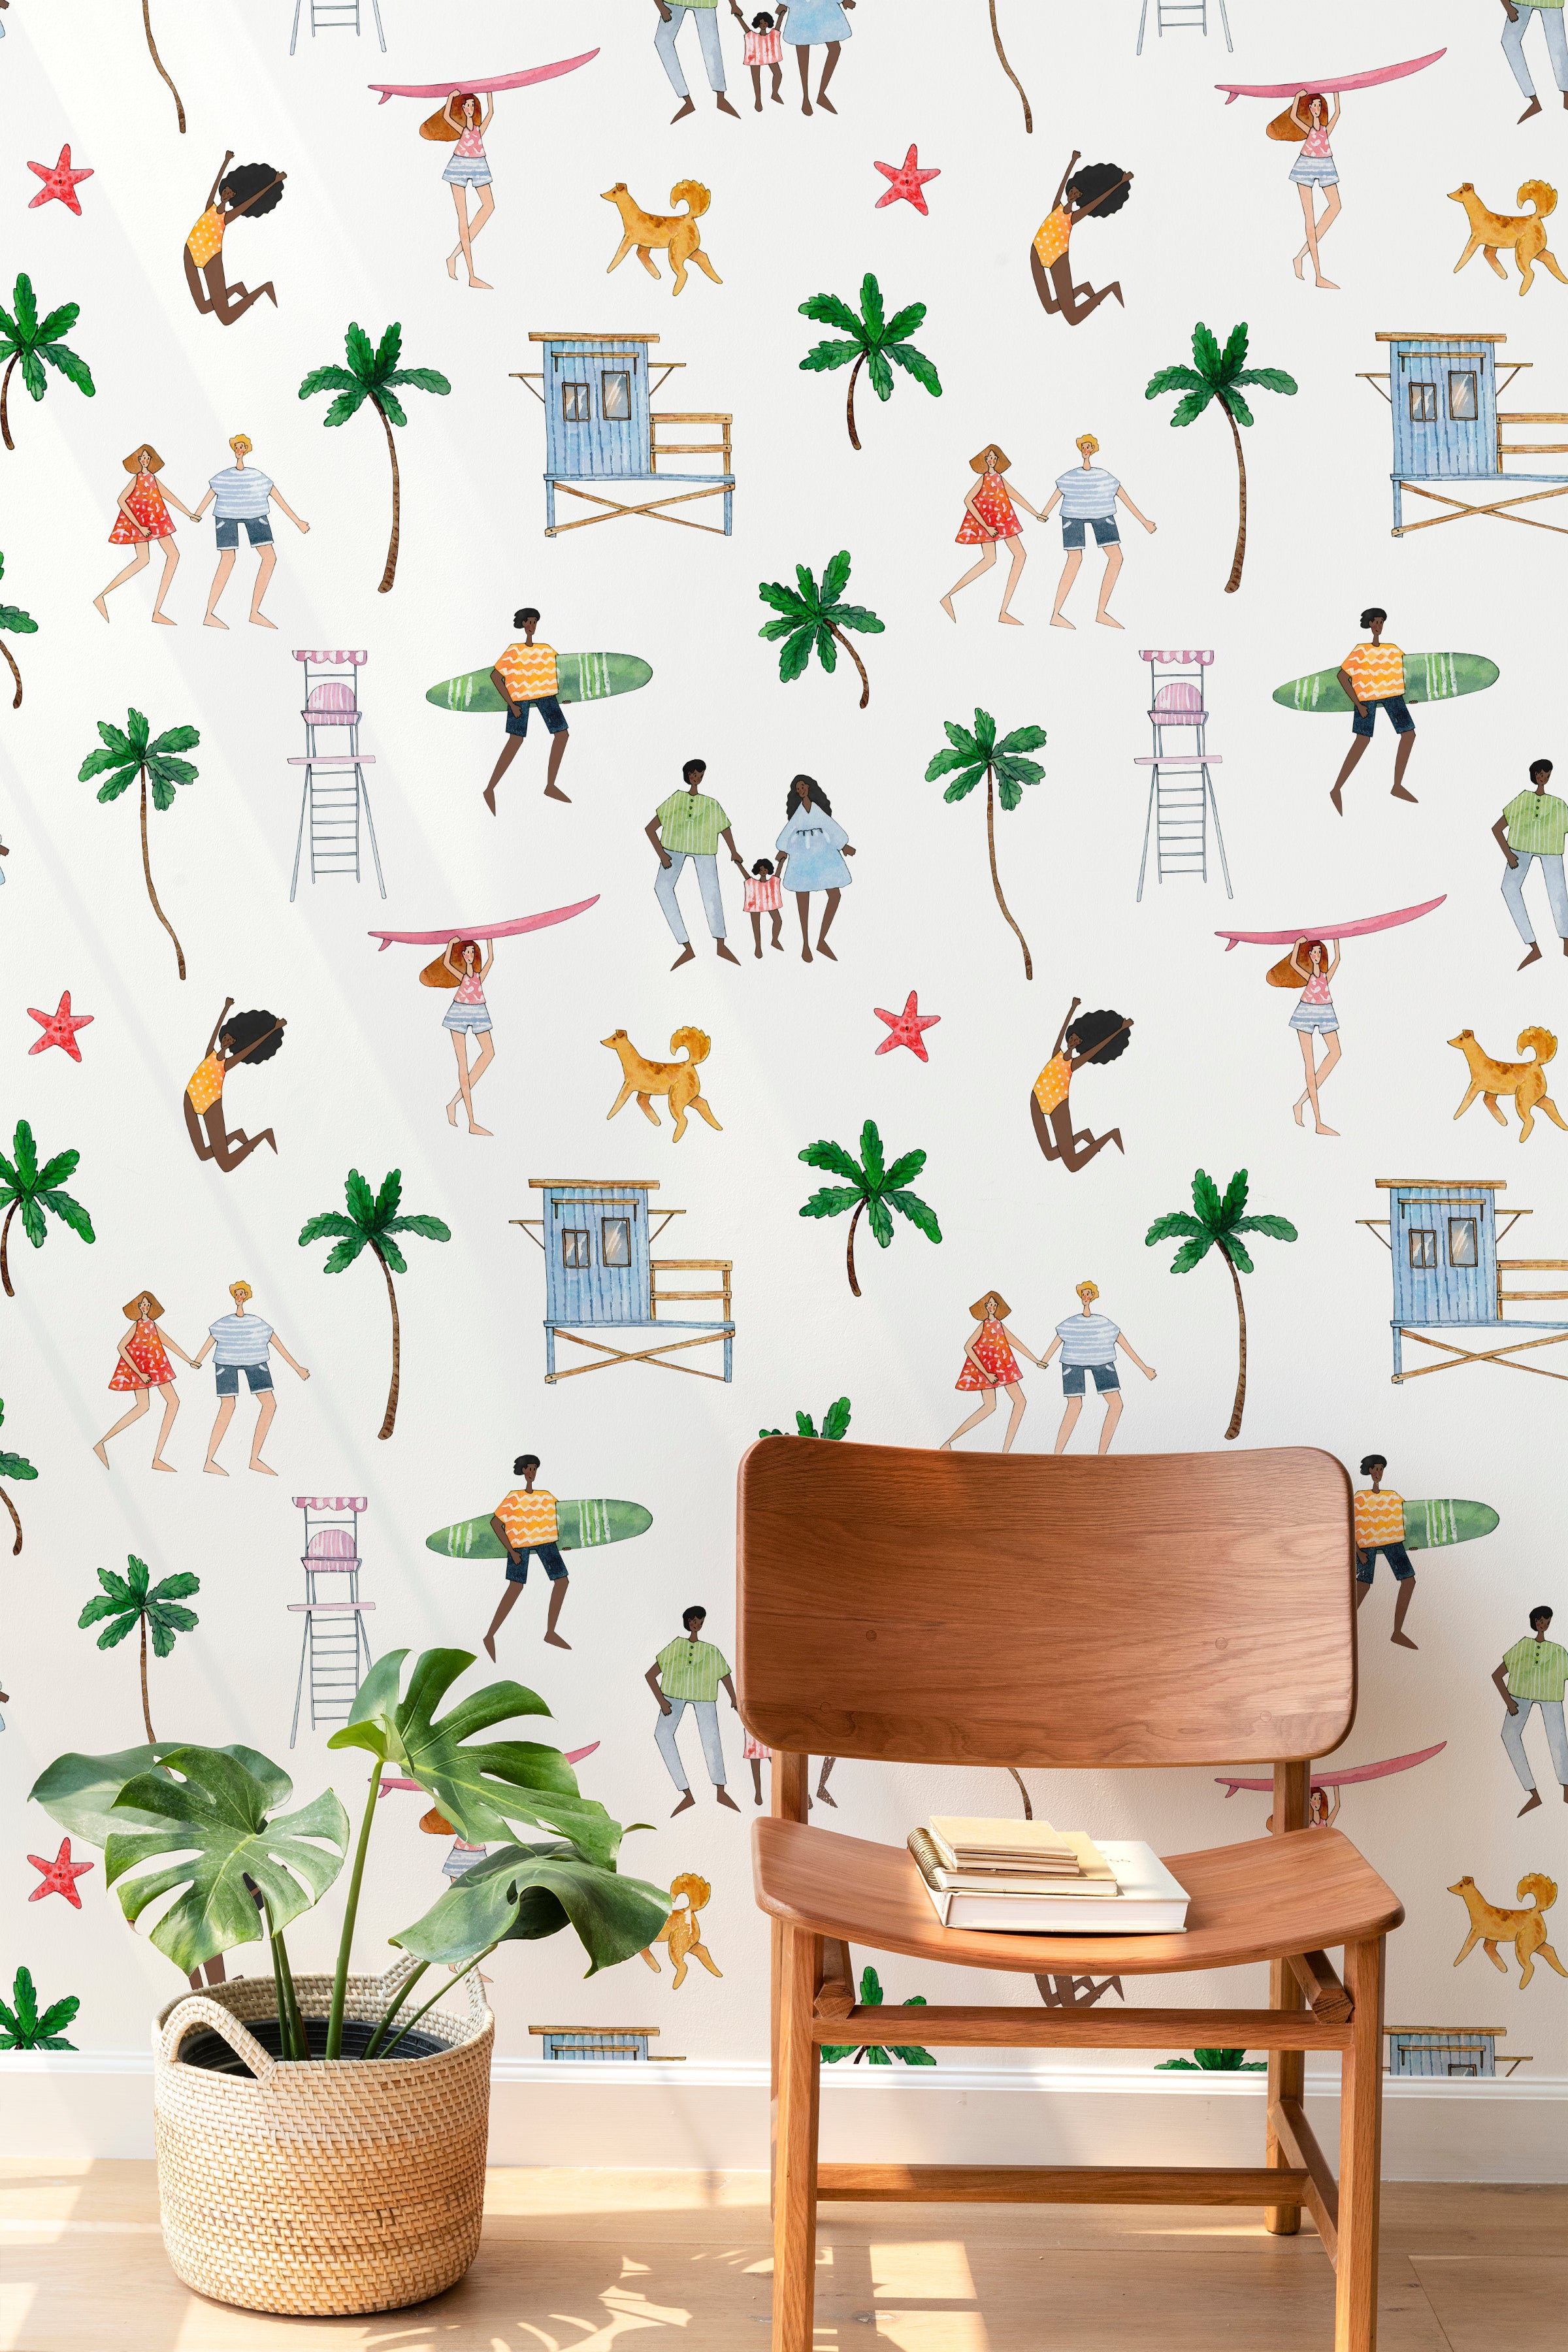 A bright room with Beach Party Wallpaper displaying beach scenes, palm trees, and people surfing. A wooden chair and a plant add a natural touch to the decor.